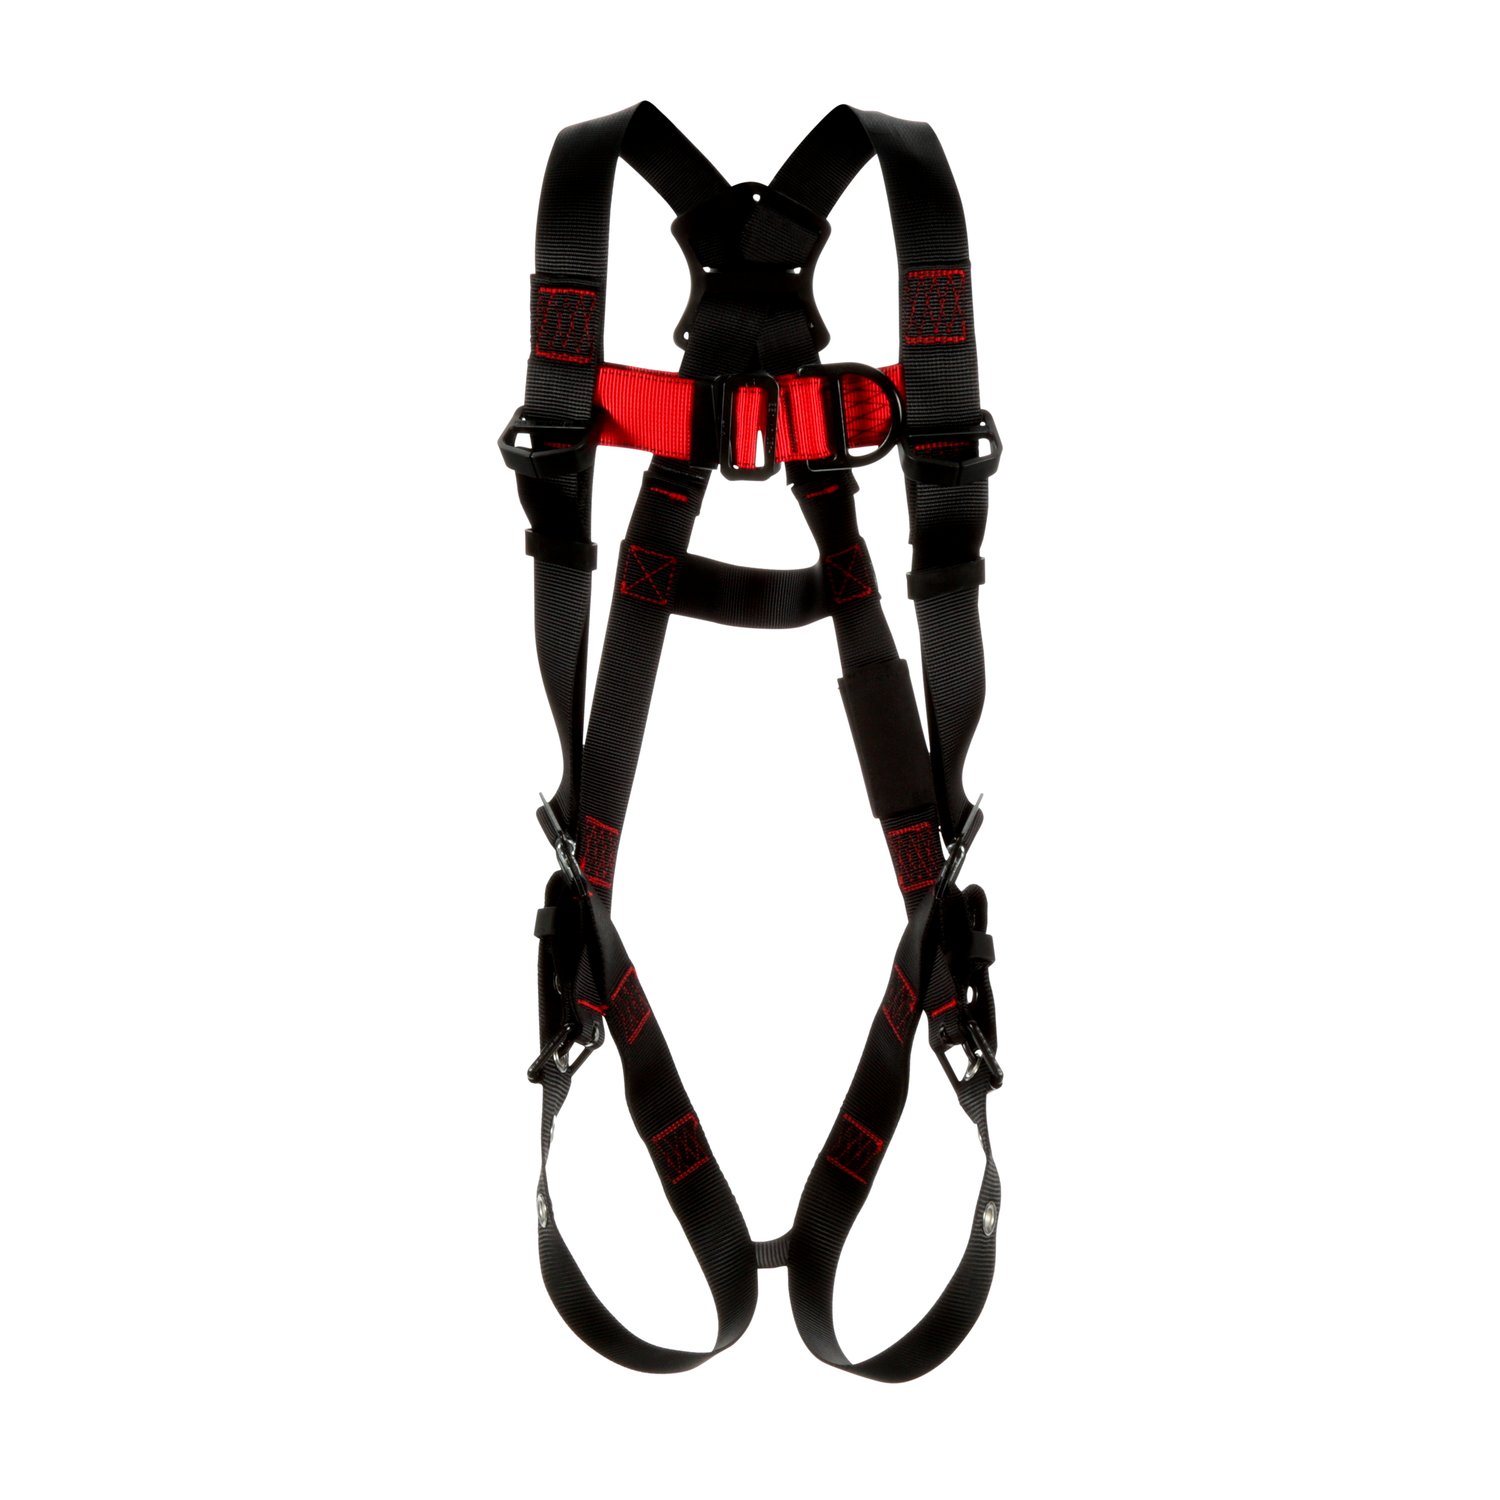 7012816771 - 3M Protecta P200 Vest Climbing Safety Harness 1161523, 2X